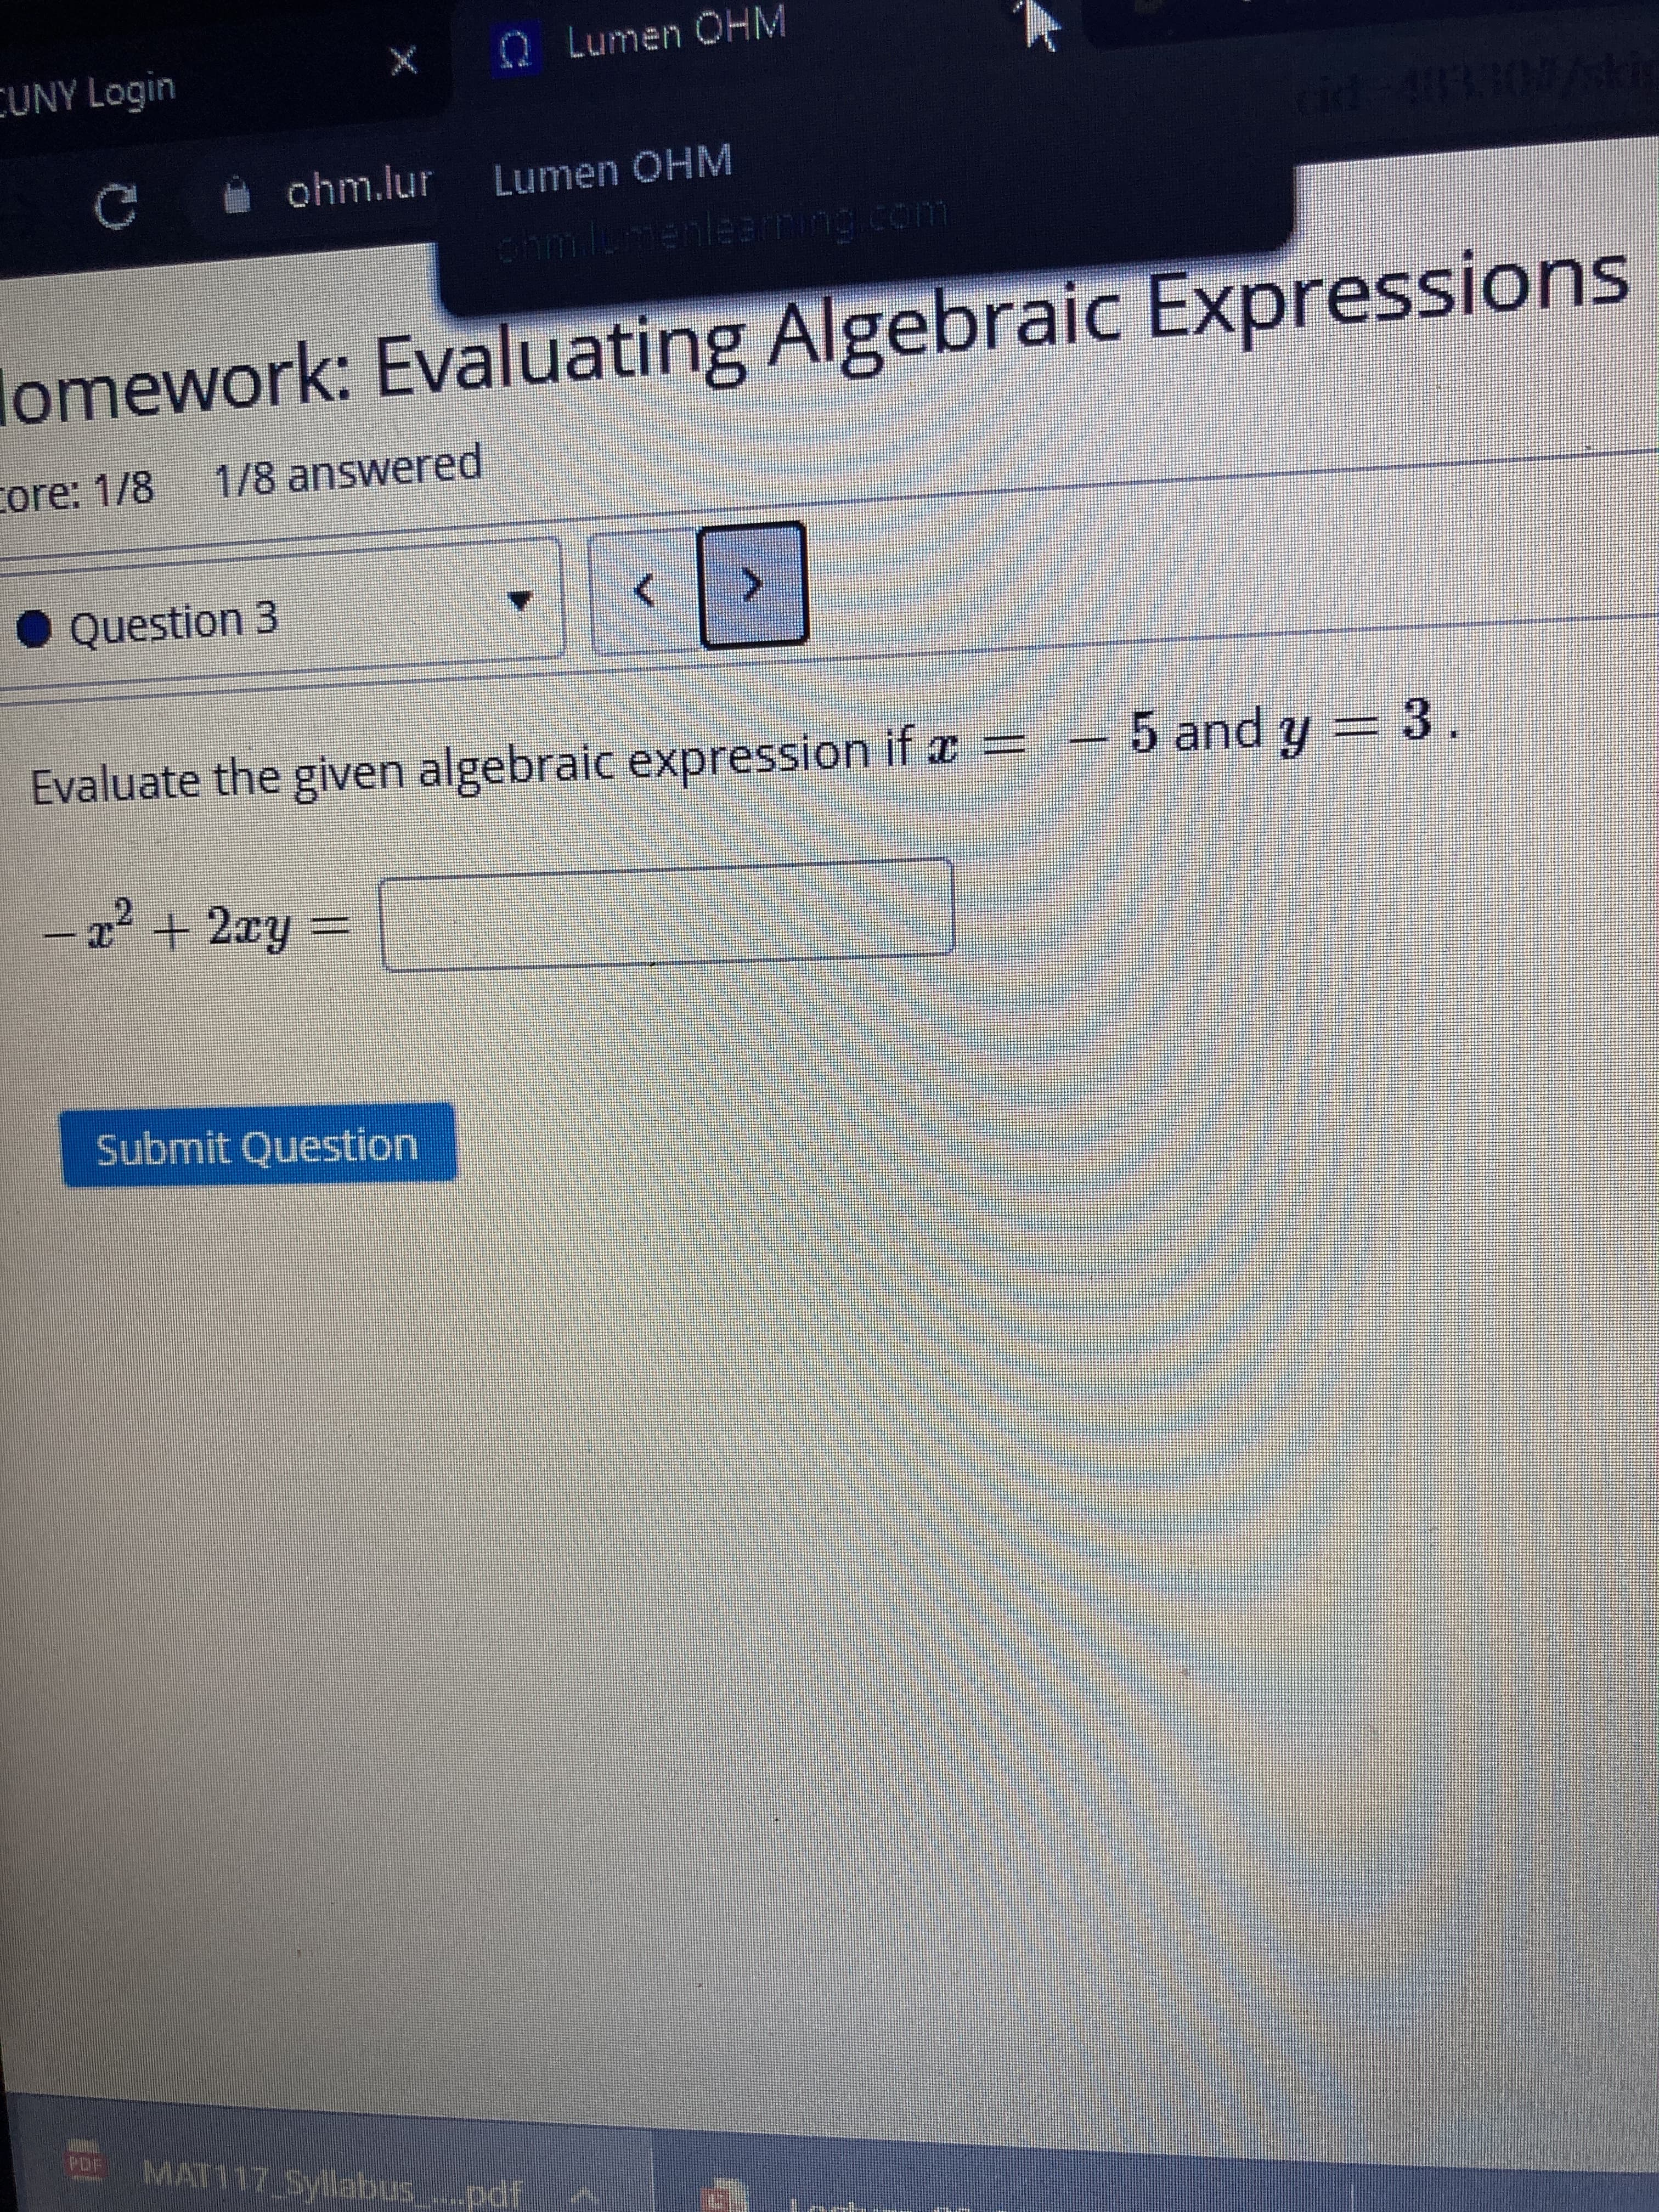 Evaluate the given algebraic expression
